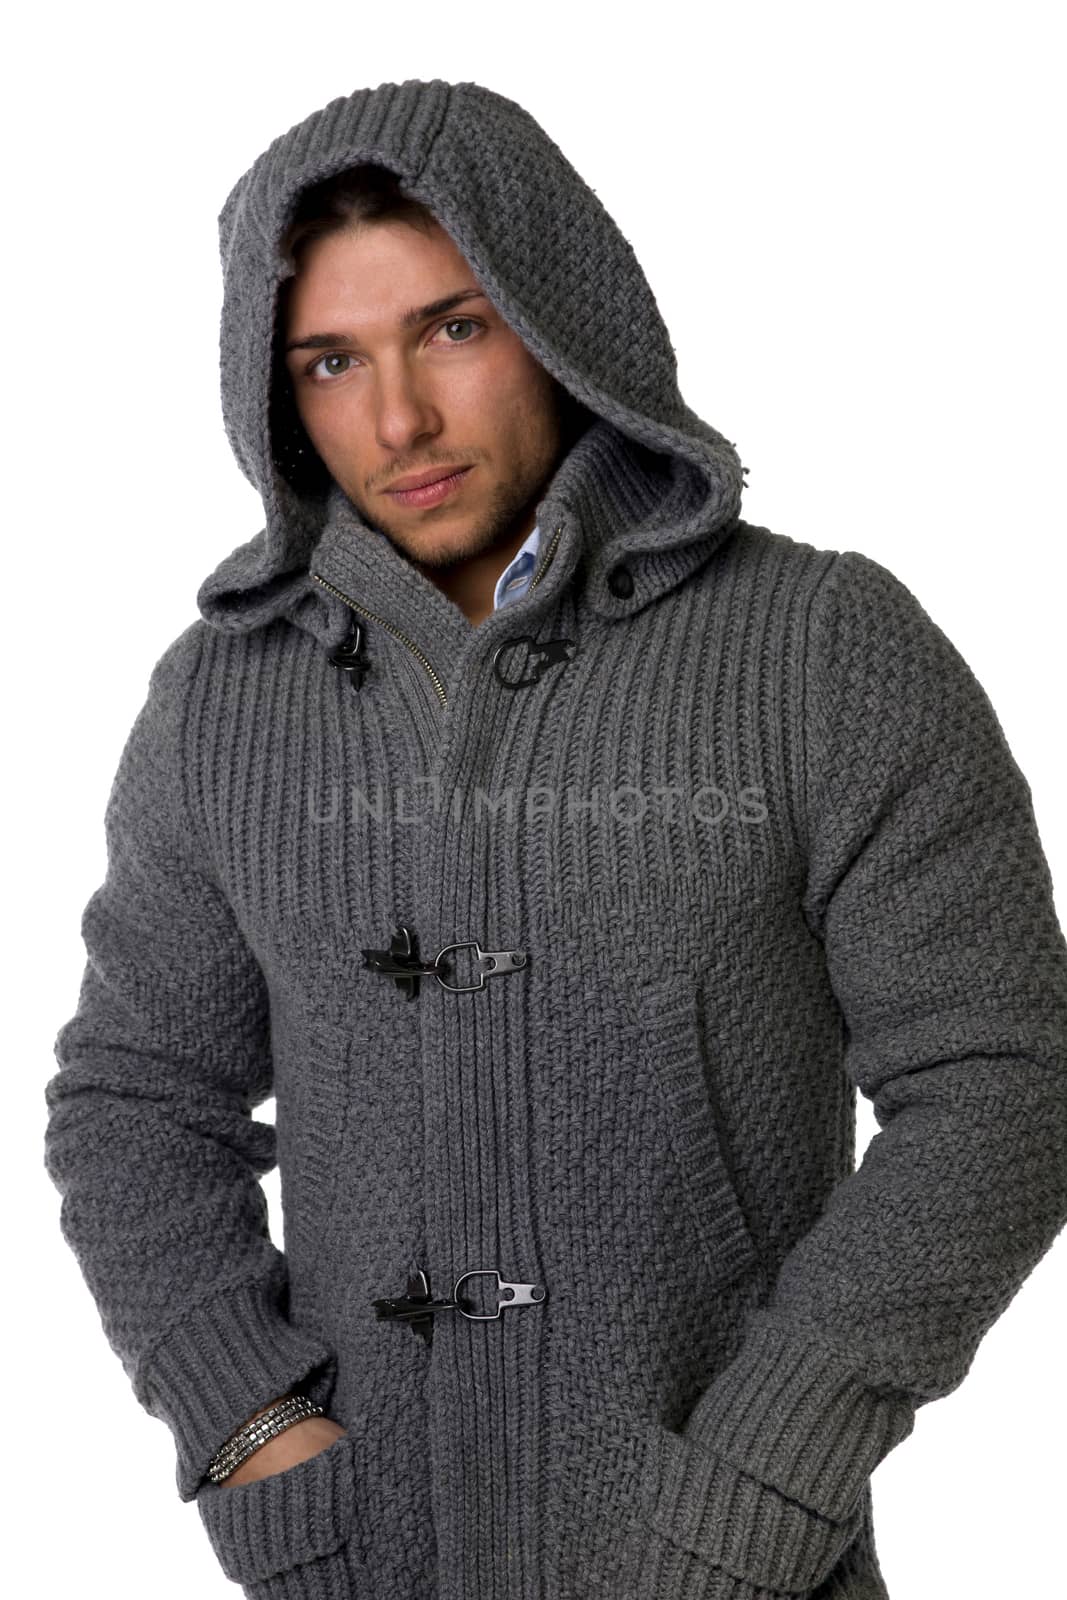 Good looking young man wearing winter hoodie sweater by artofphoto